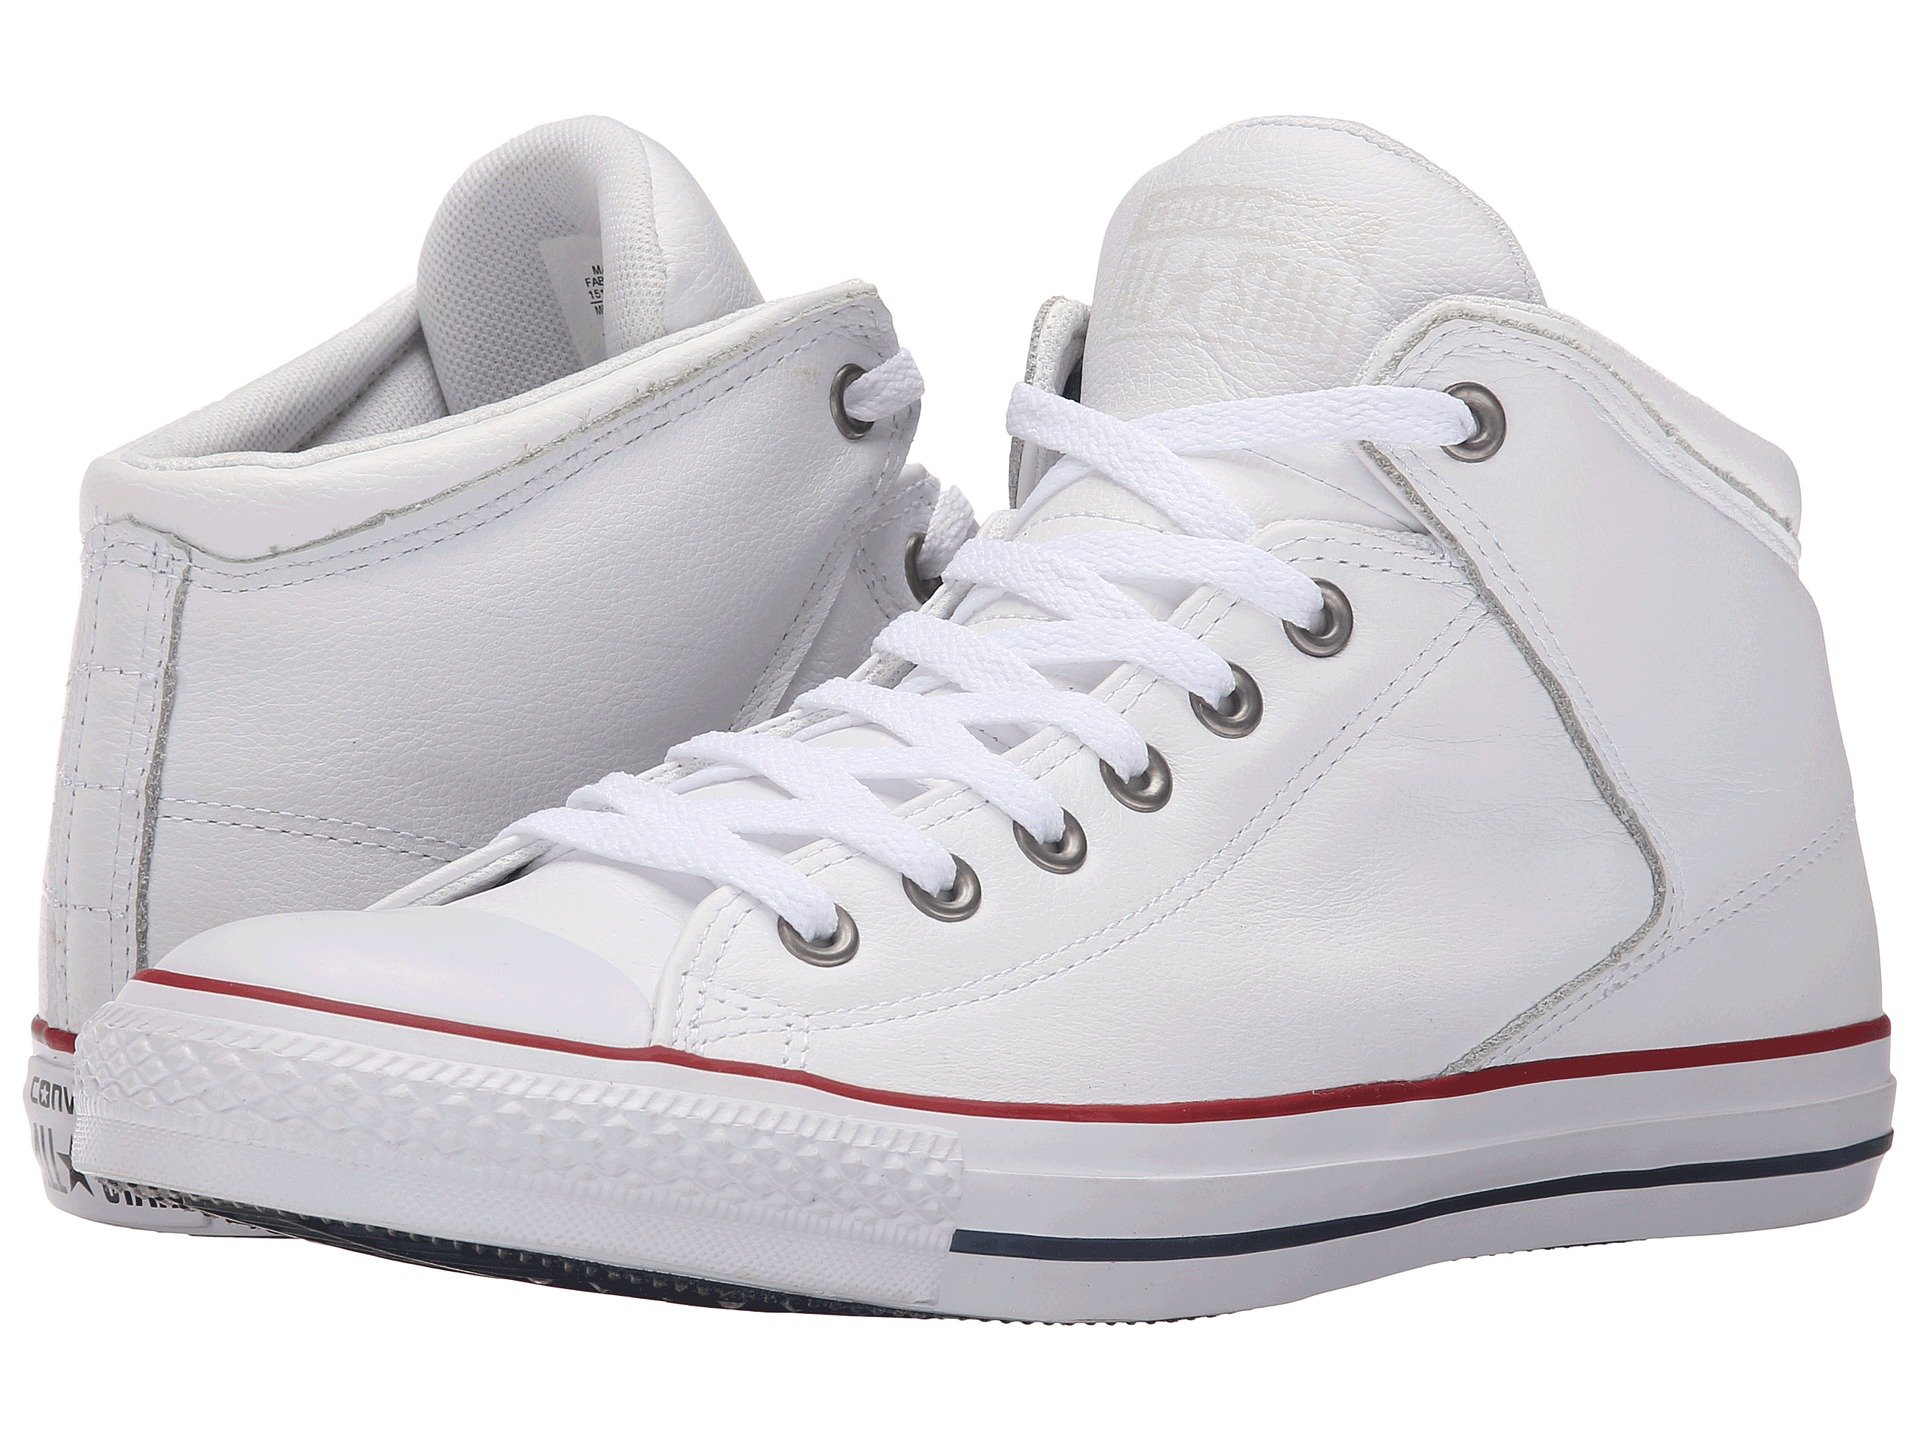 Learn about 71+ imagen converse ctas high street white - In ...